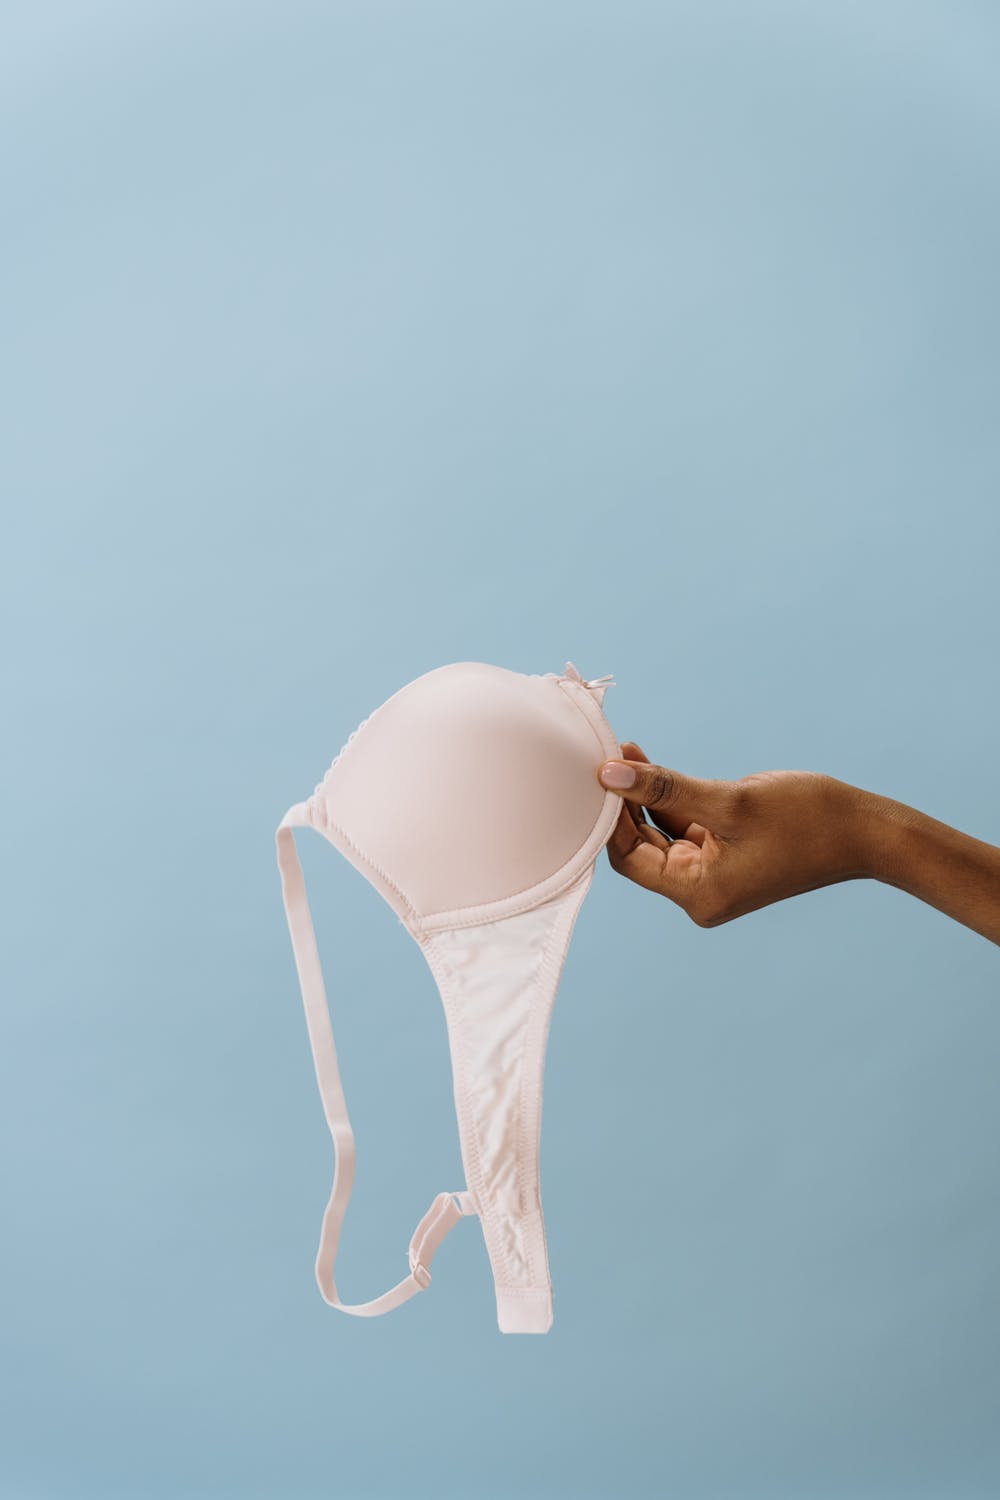 Do You Have to Wear an Underwire Bra to Work? Really? - WSJ